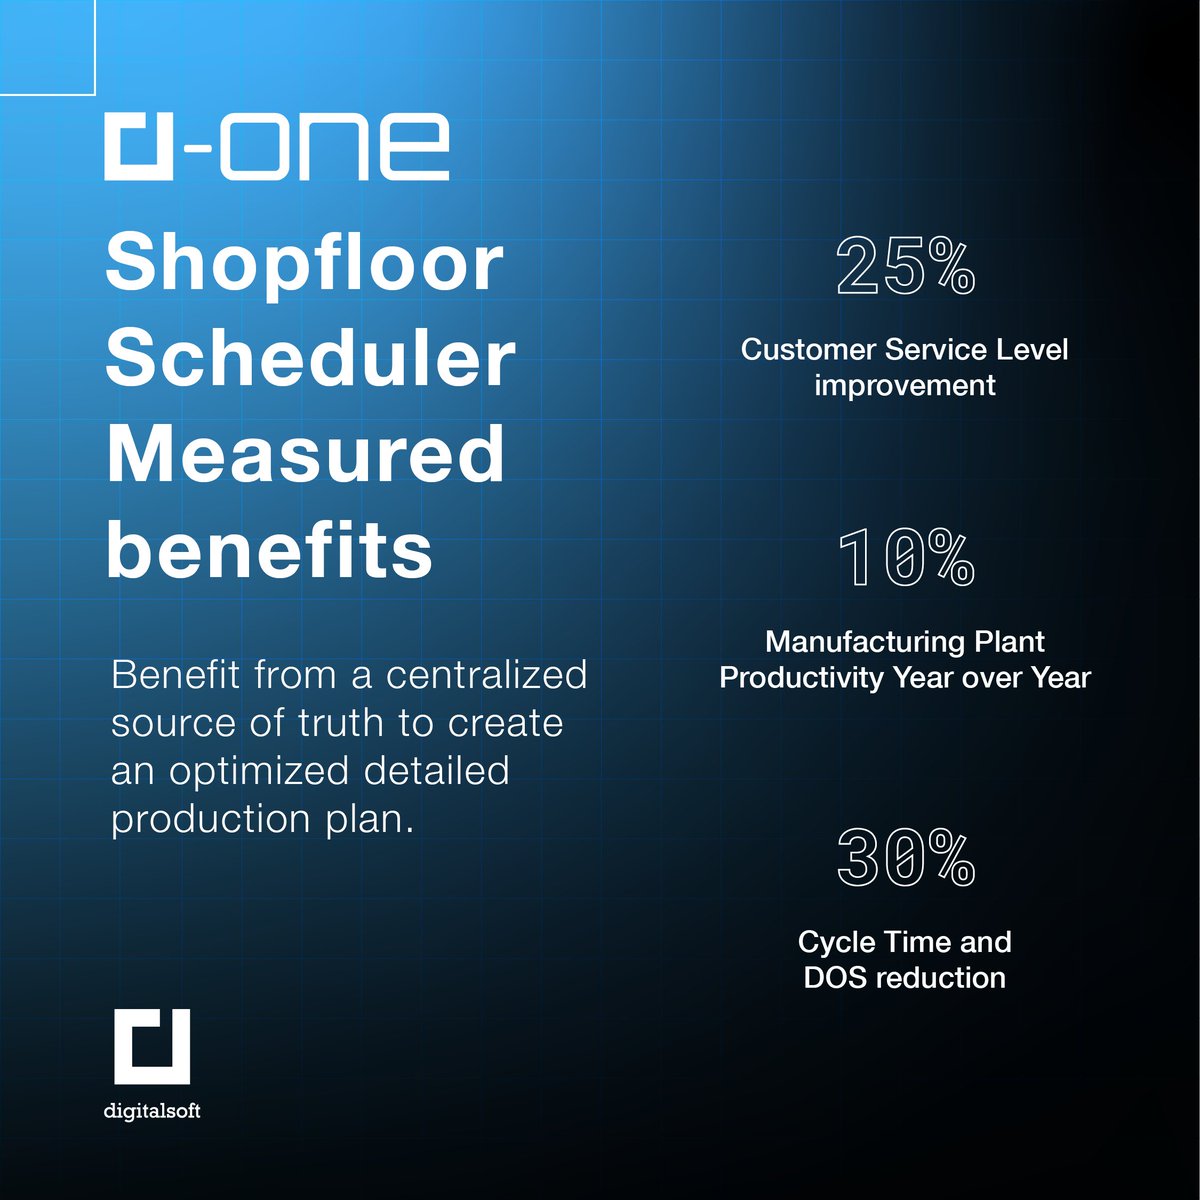 Unlock efficiency in shopfloor scheduling with d-one. Real-time insights, optimized production, and predictive analytics drive success. Experience increased service levels, capacity utilization, lead time reduction, and productivity growth. #Shopfloorscheduler